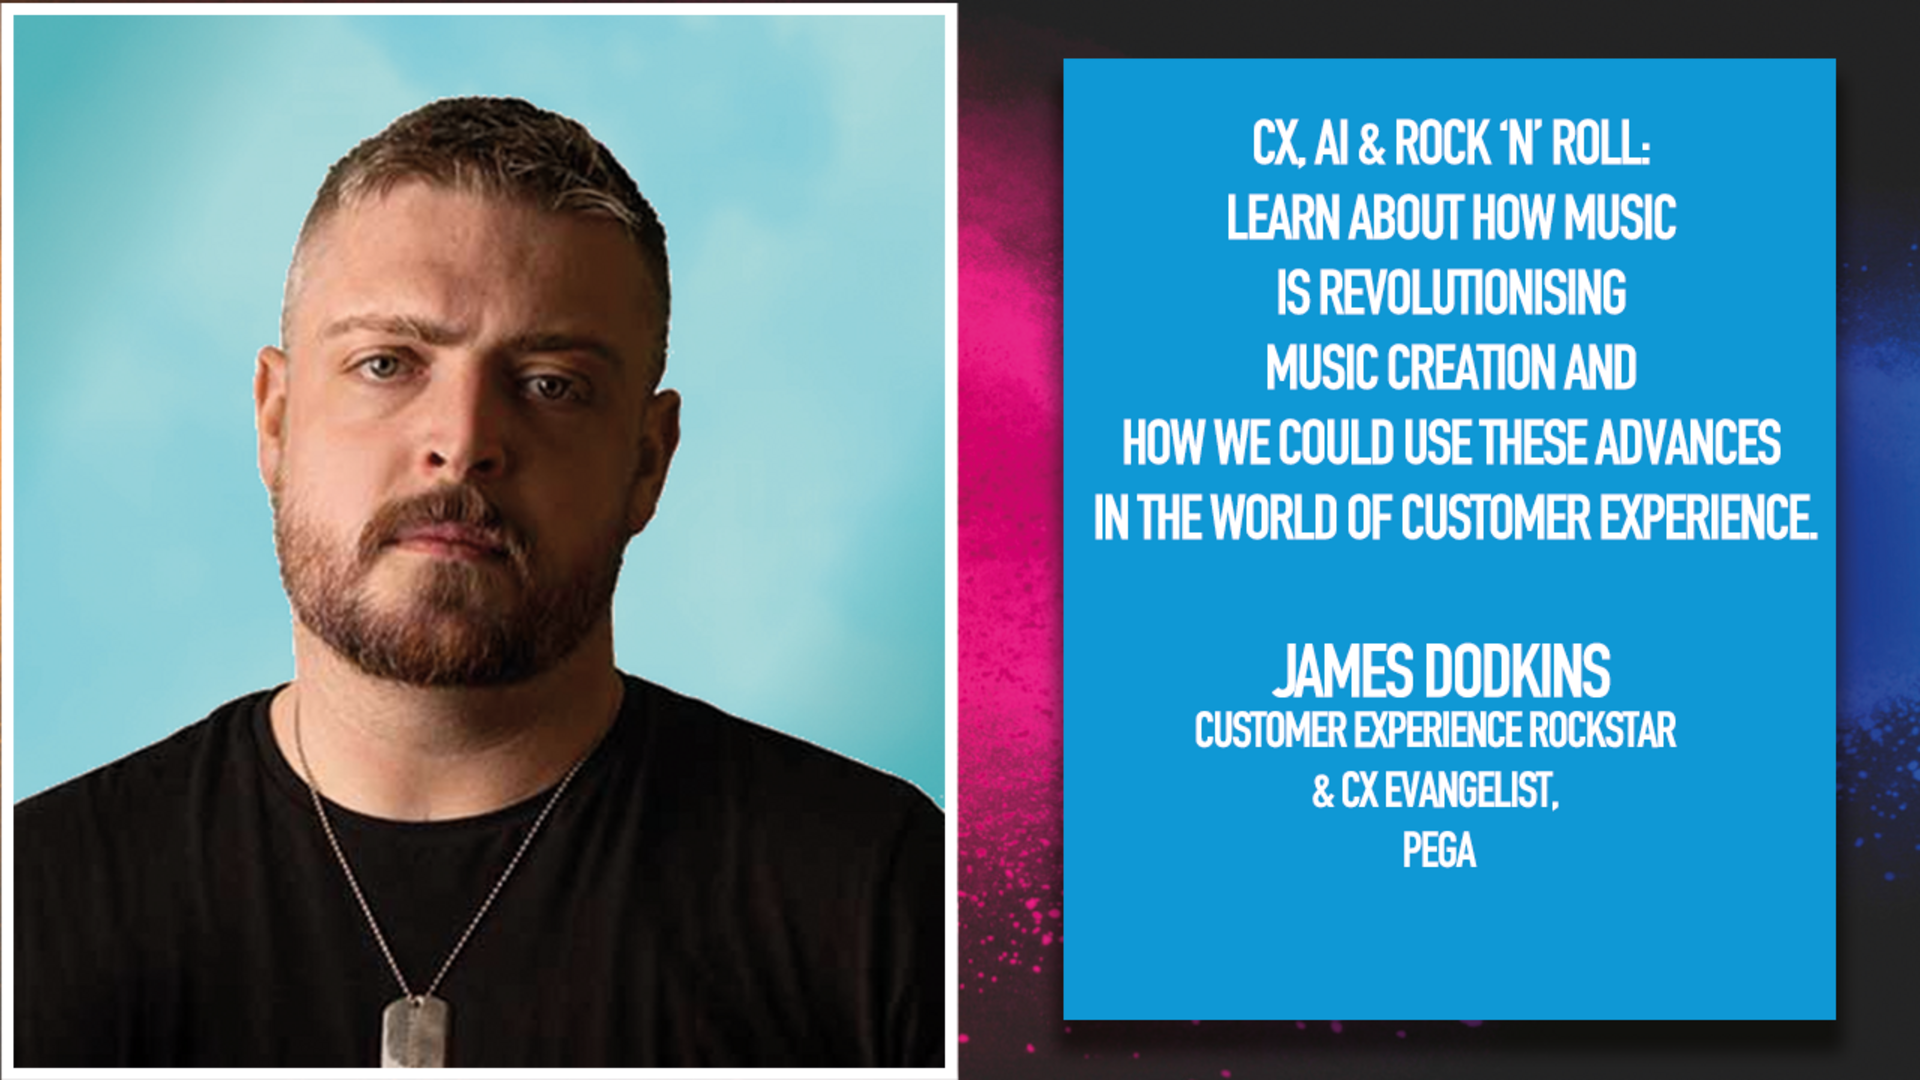 CX, AI & Rock ‘n’ Roll: Learn about how music is revolutionising music creation and how we could use these advances in the world of Customer Experience.